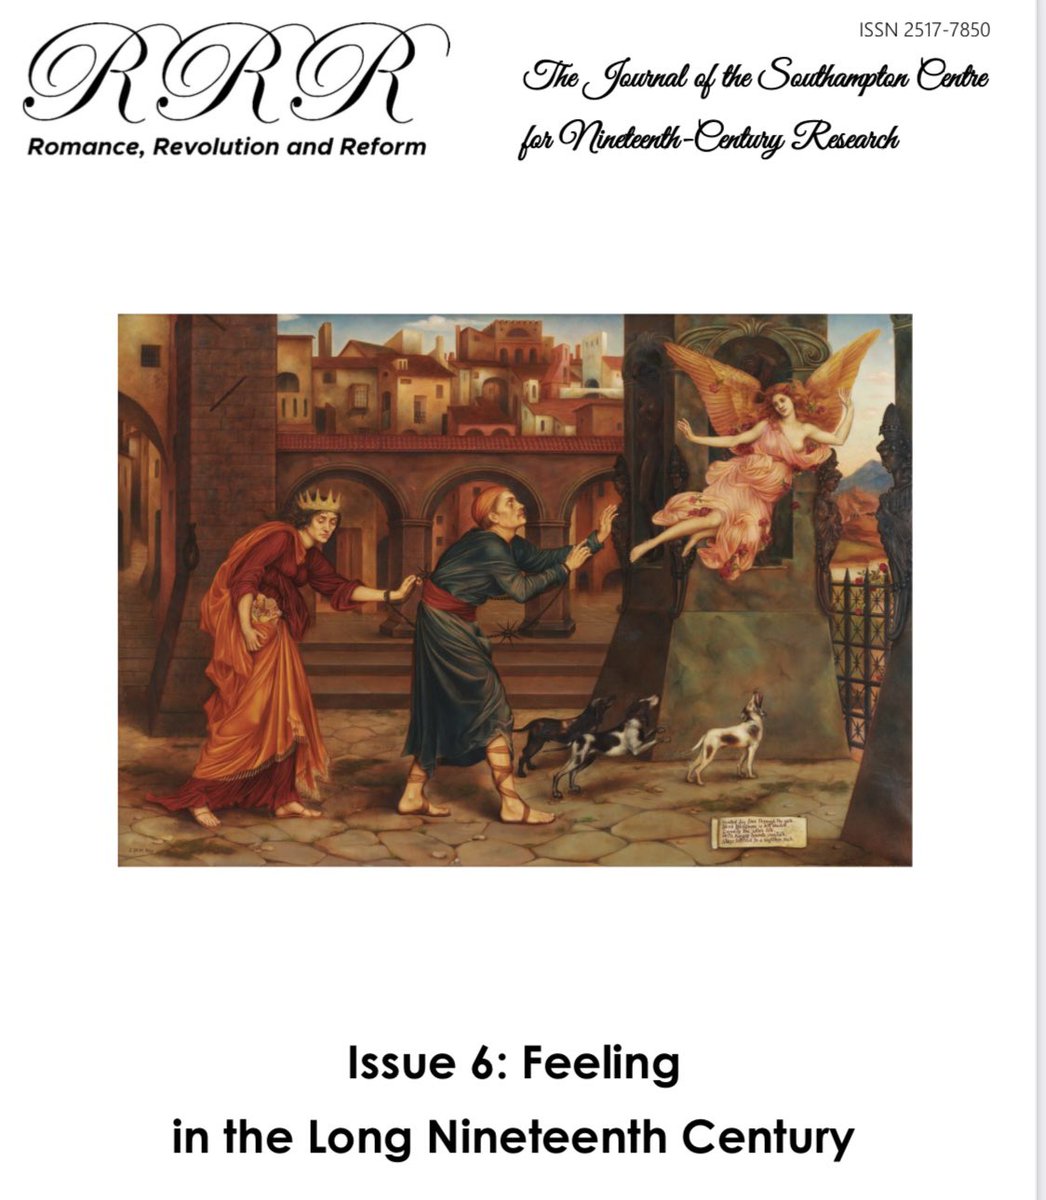 We are delighted to announce the publication of Issue 6, “Feeling in the Long Nineteenth Century”, available here: rrrjournal.com/issue/6 🥳 A huge thank you to everyone - authors, reviewers, editors, readers - involved in producing this issue; we hope you enjoy reading it!